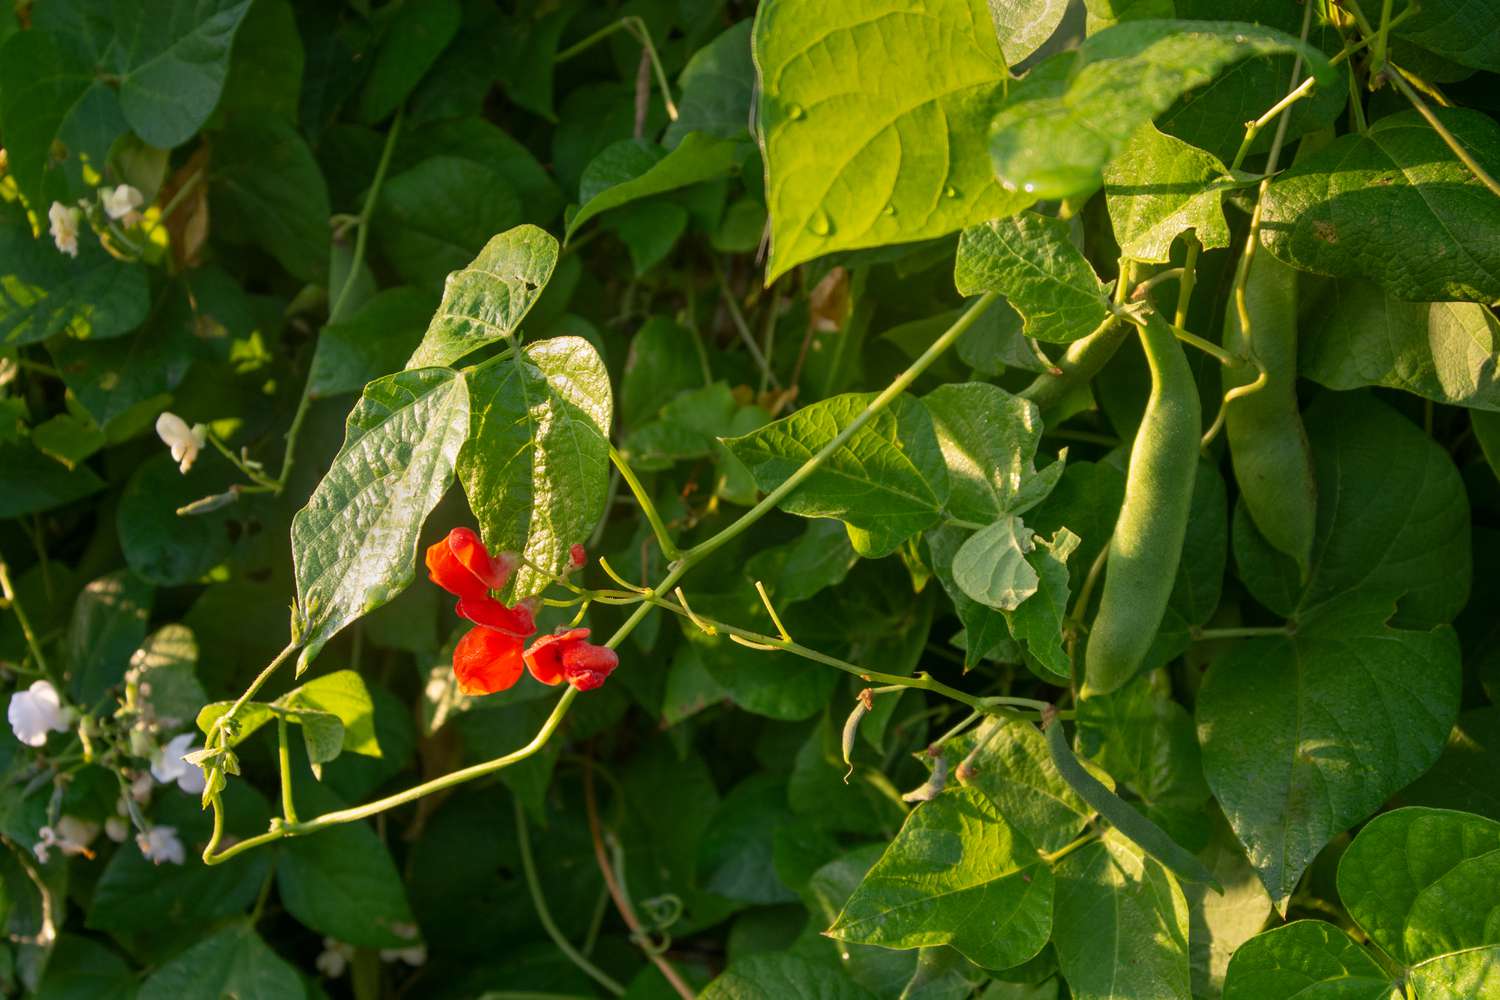 Scarlet runner heirloom pole bean plant with red flowers on end of stem and green bean pods hanging